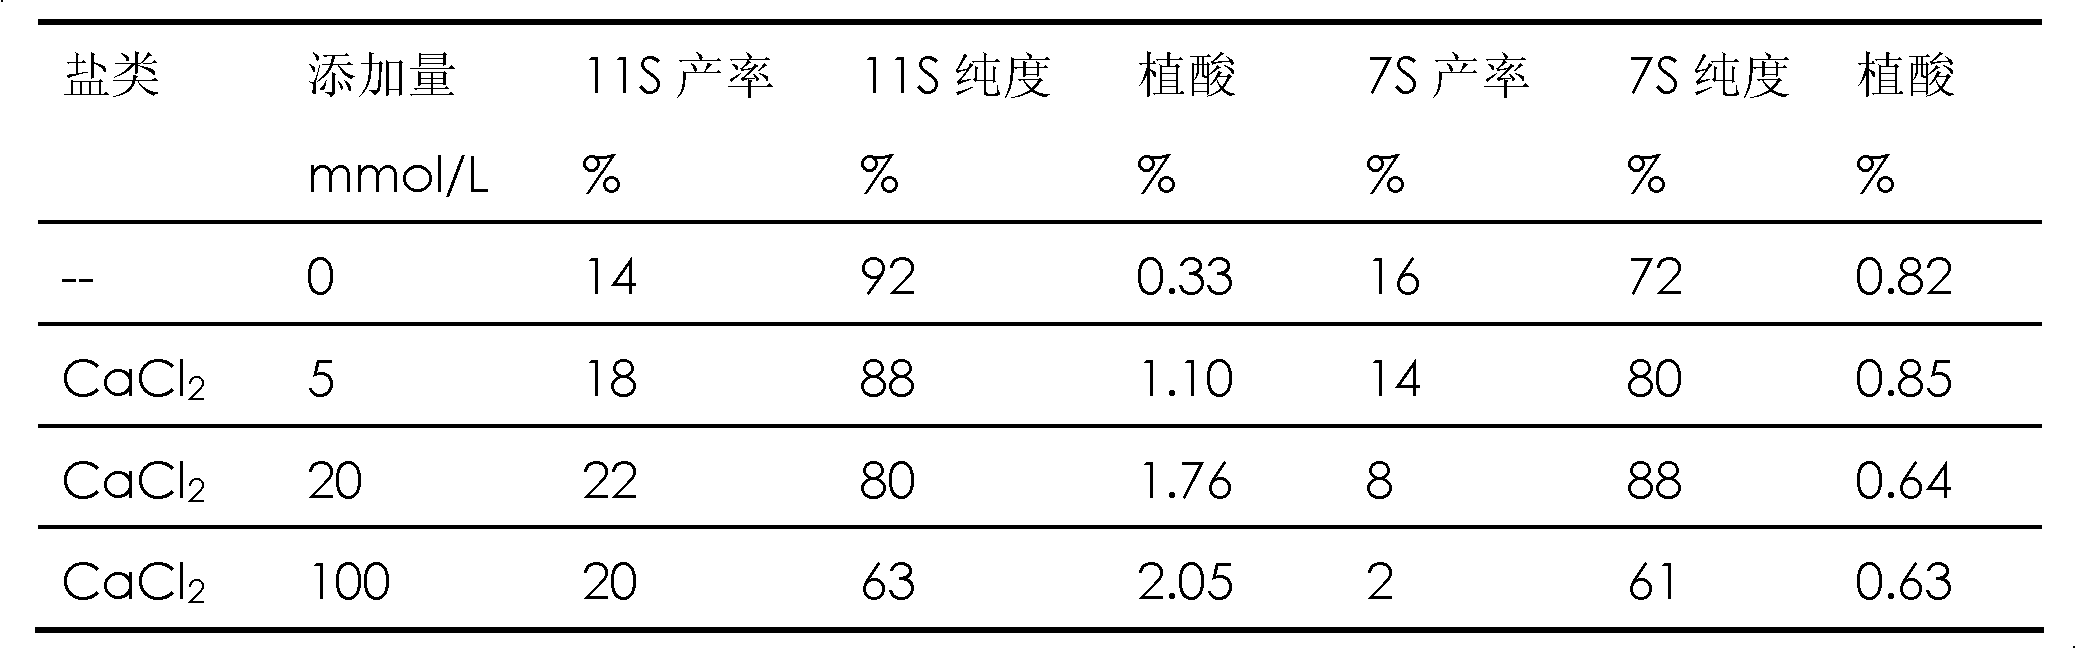 Method for producing grading soy protein